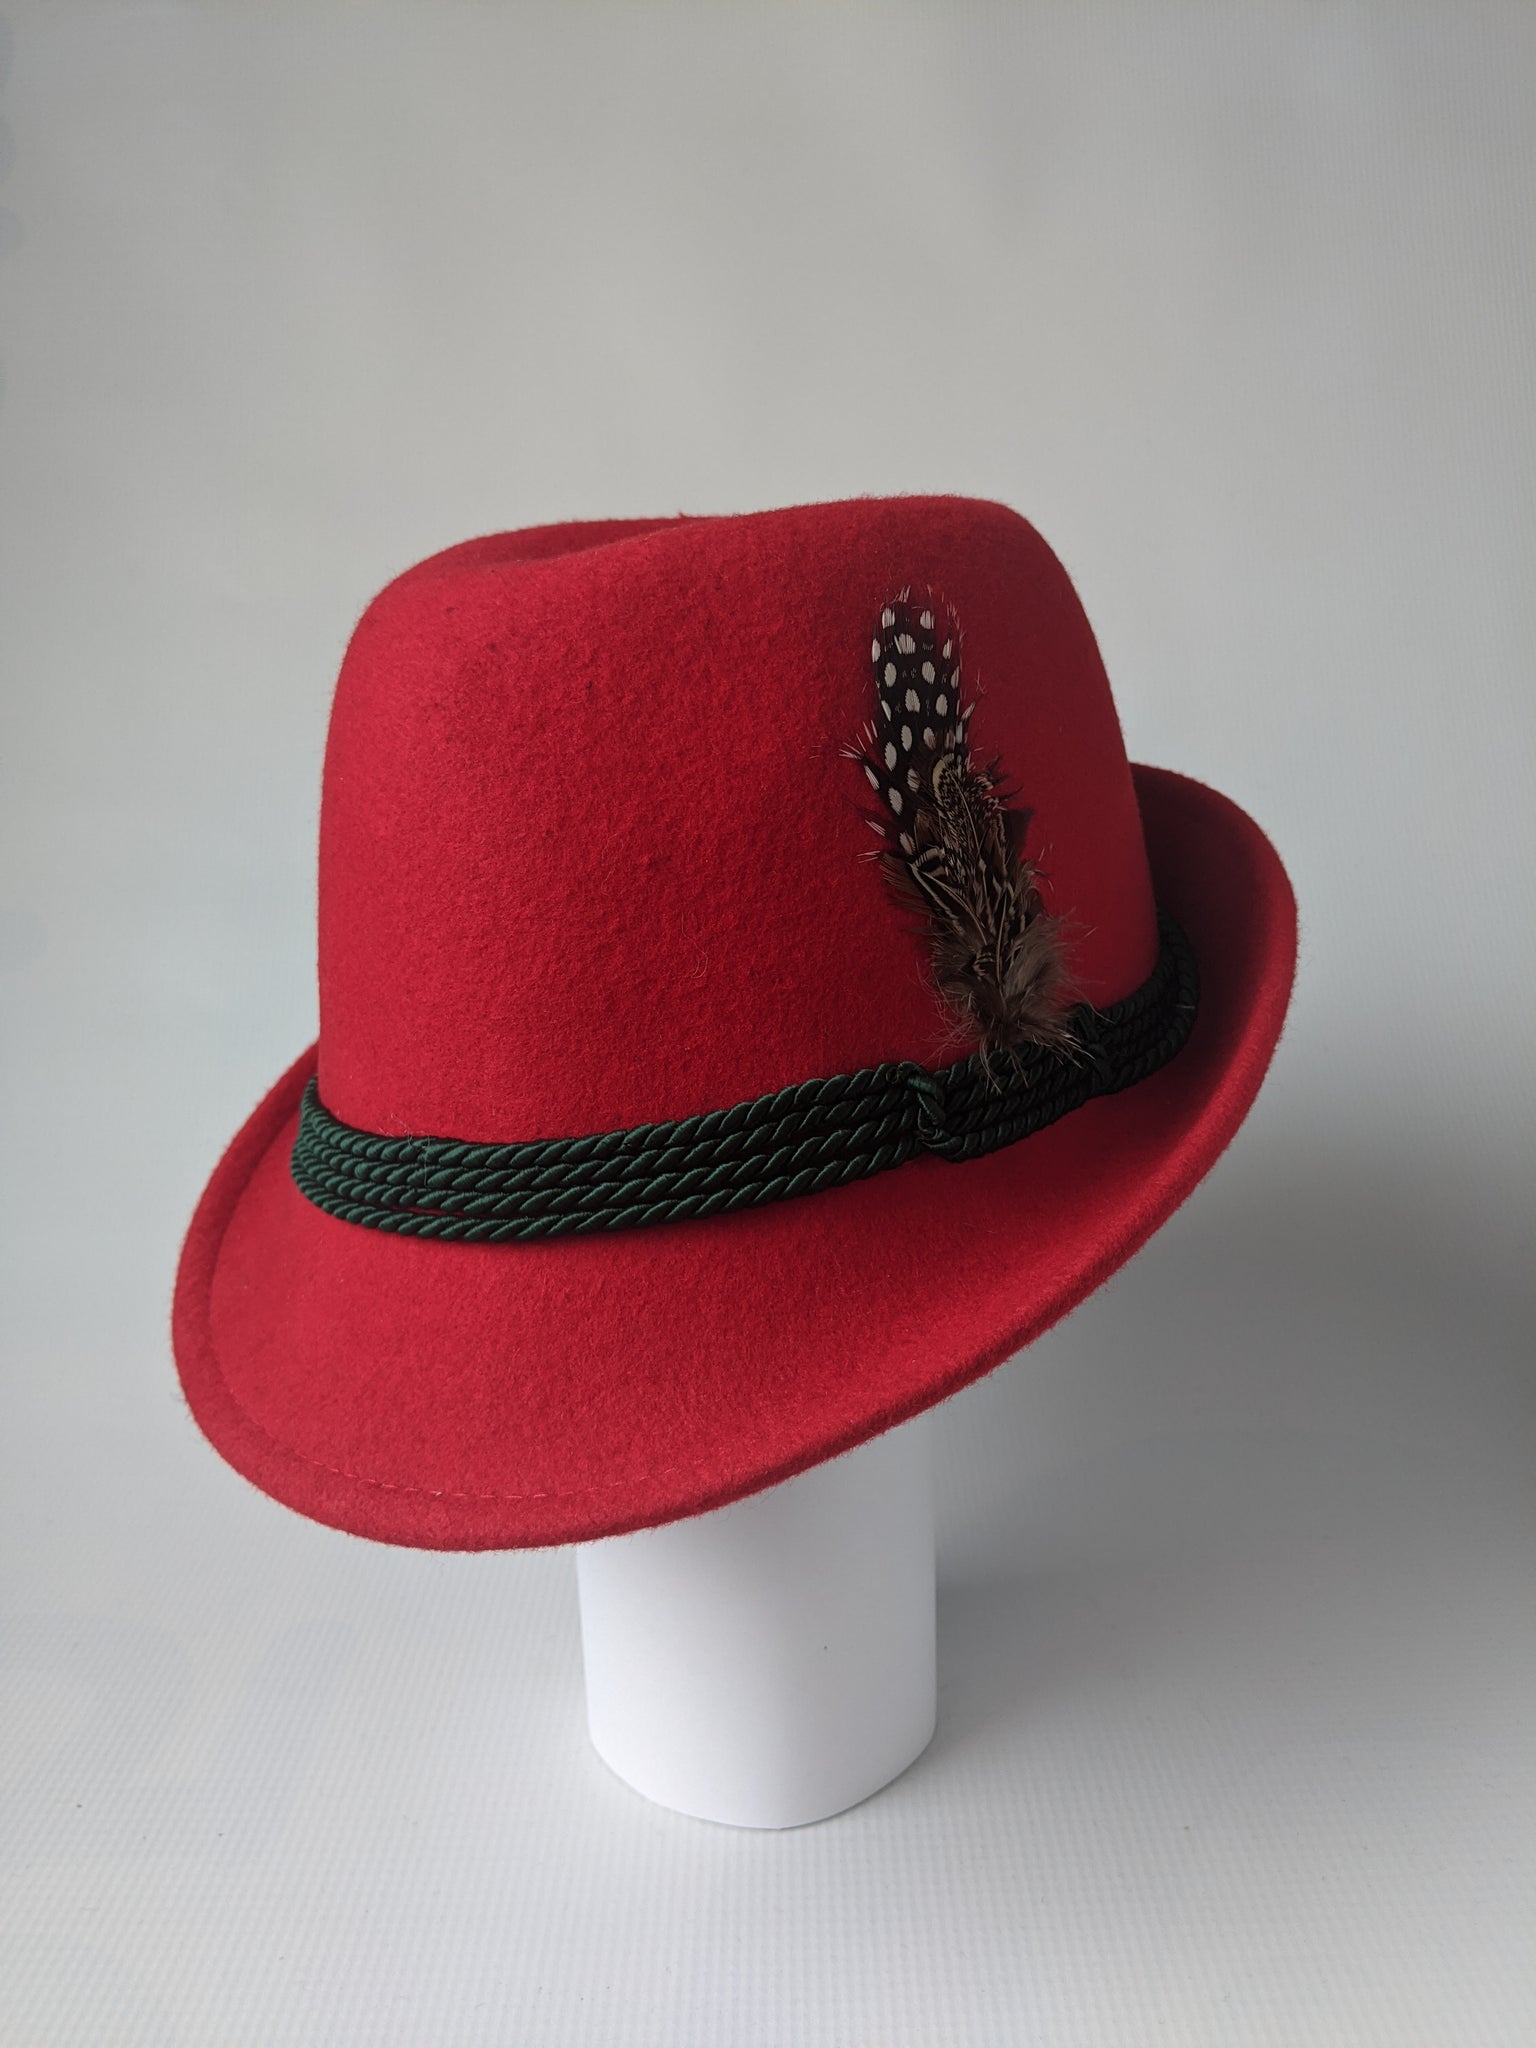 Classy Fedora Style German Wool Hat With Feathers – German